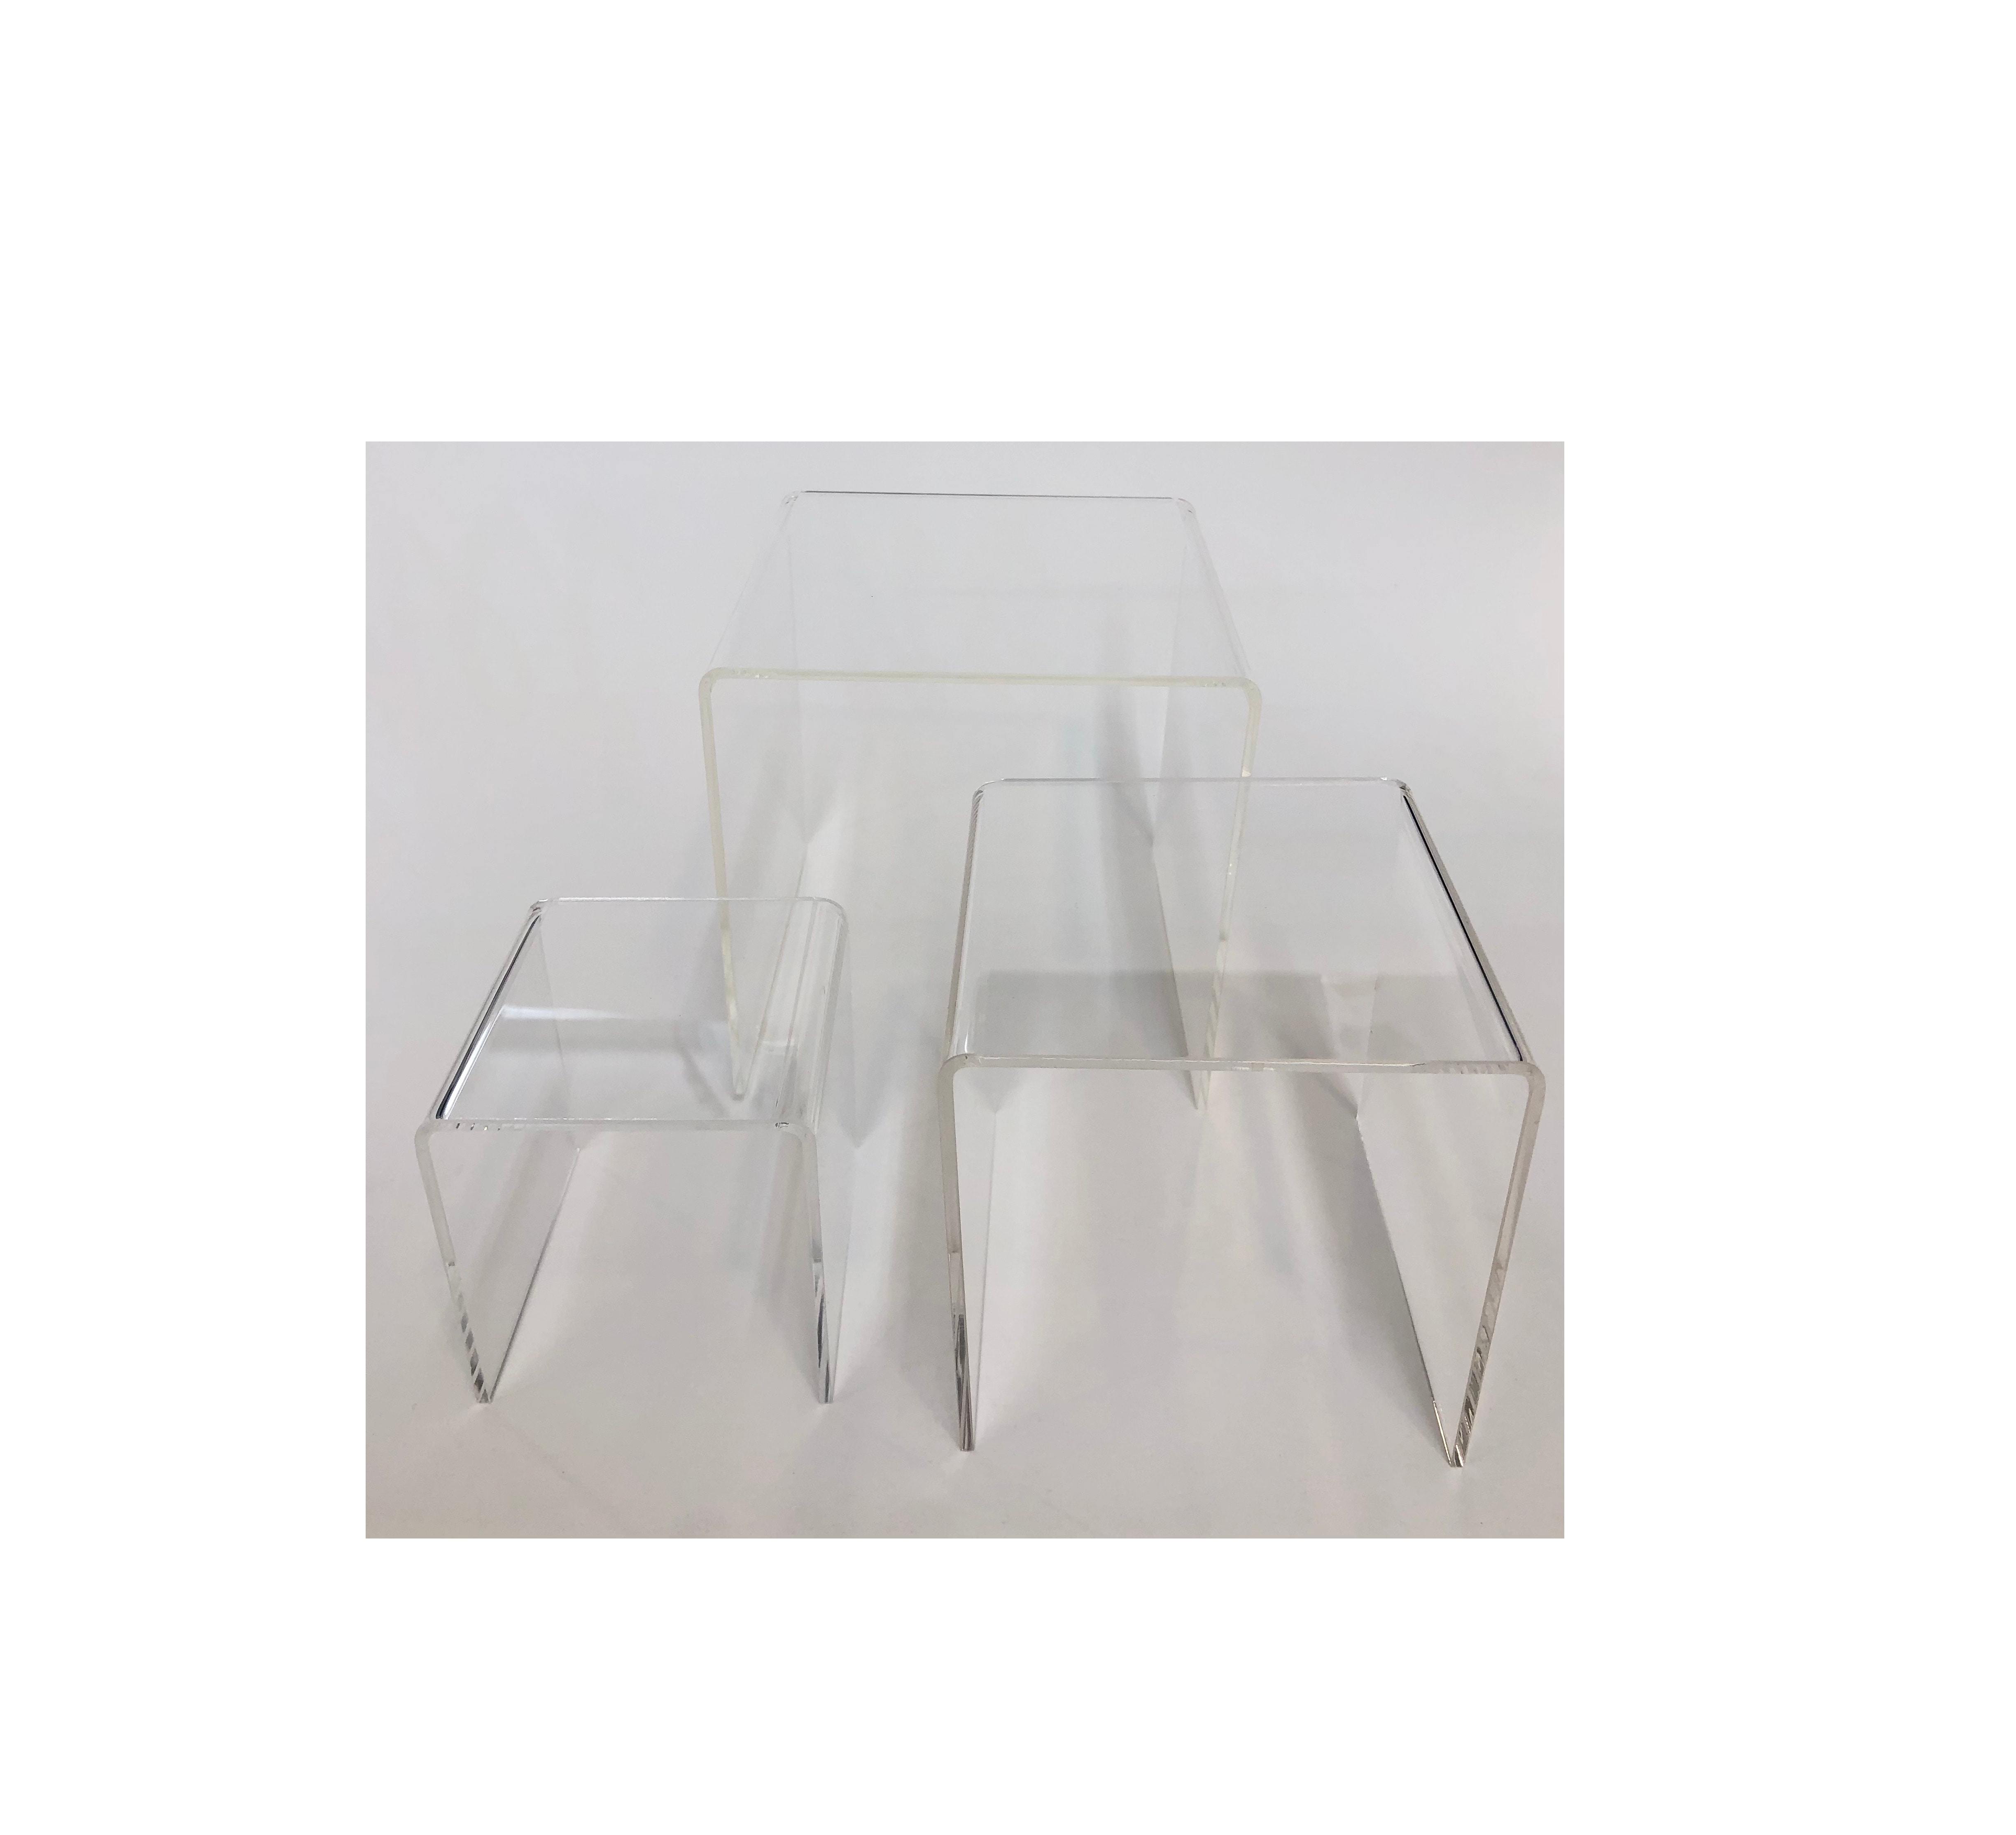 Set of 3 Acrylic Plastic Clear Riser Stand to Display 6 8 10 Fixtures Jewelry